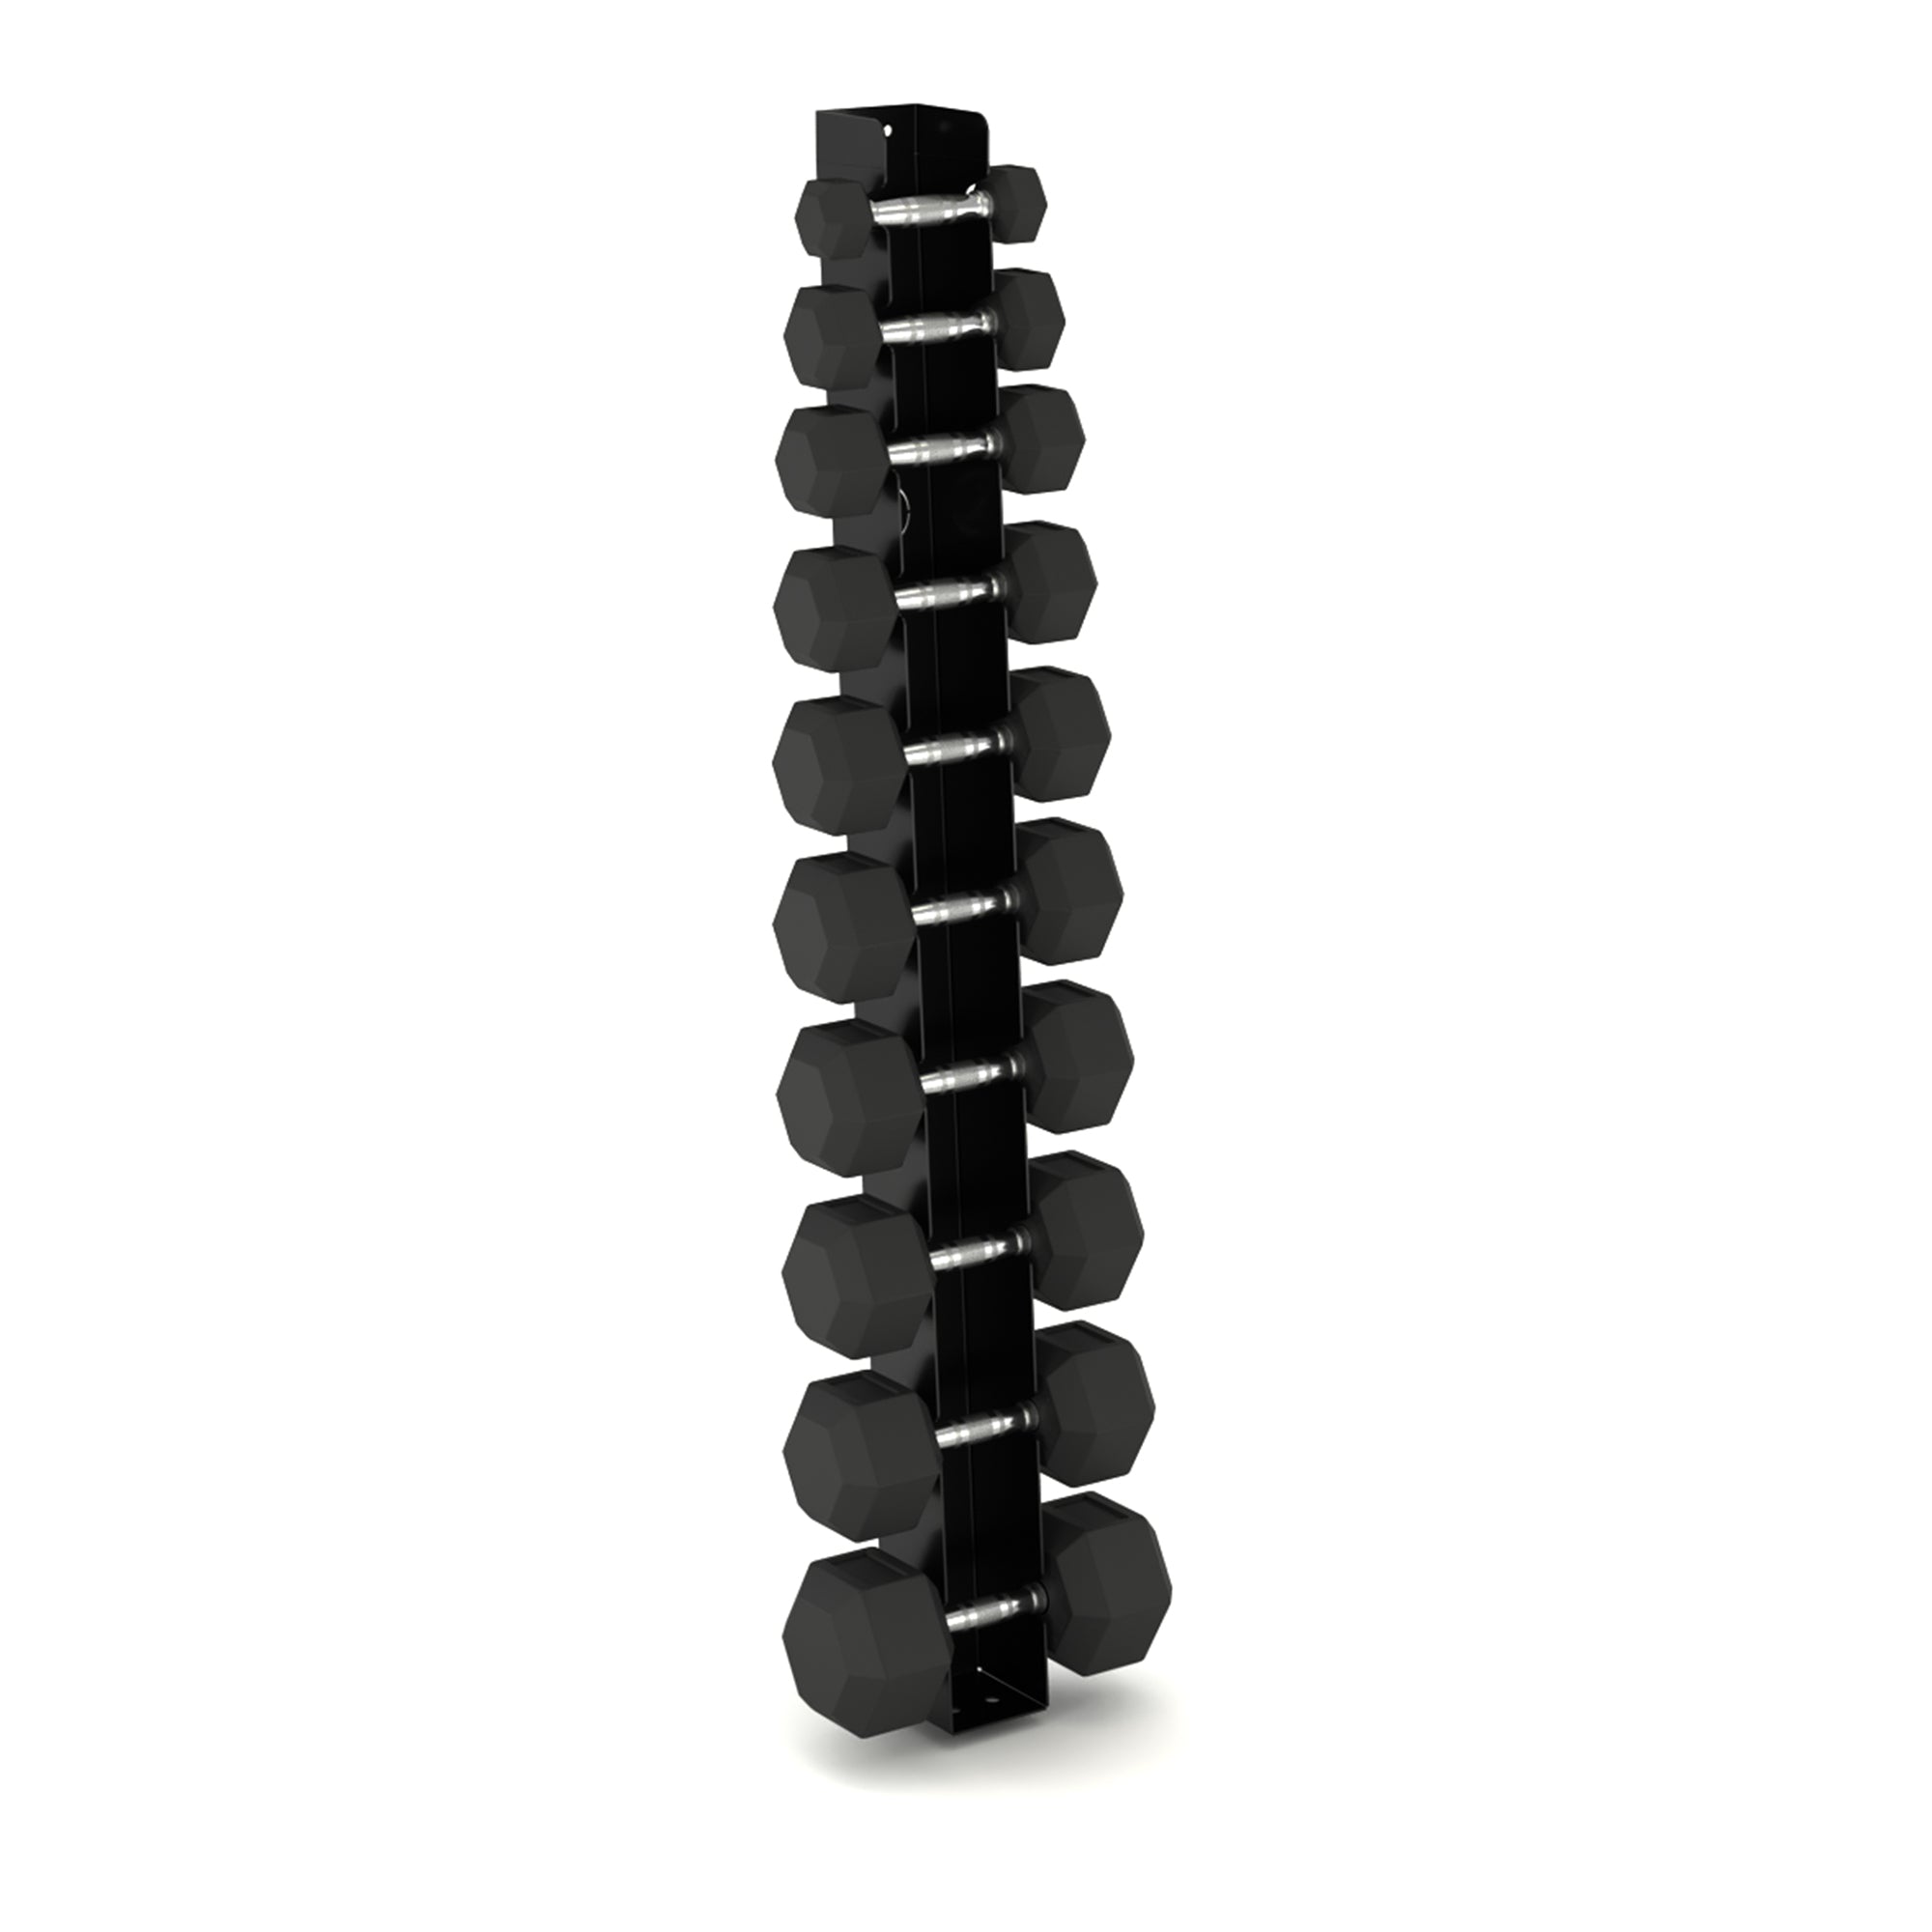 Wall Mounted Angled Dumbbell Storage Rack (Up to 25kg)